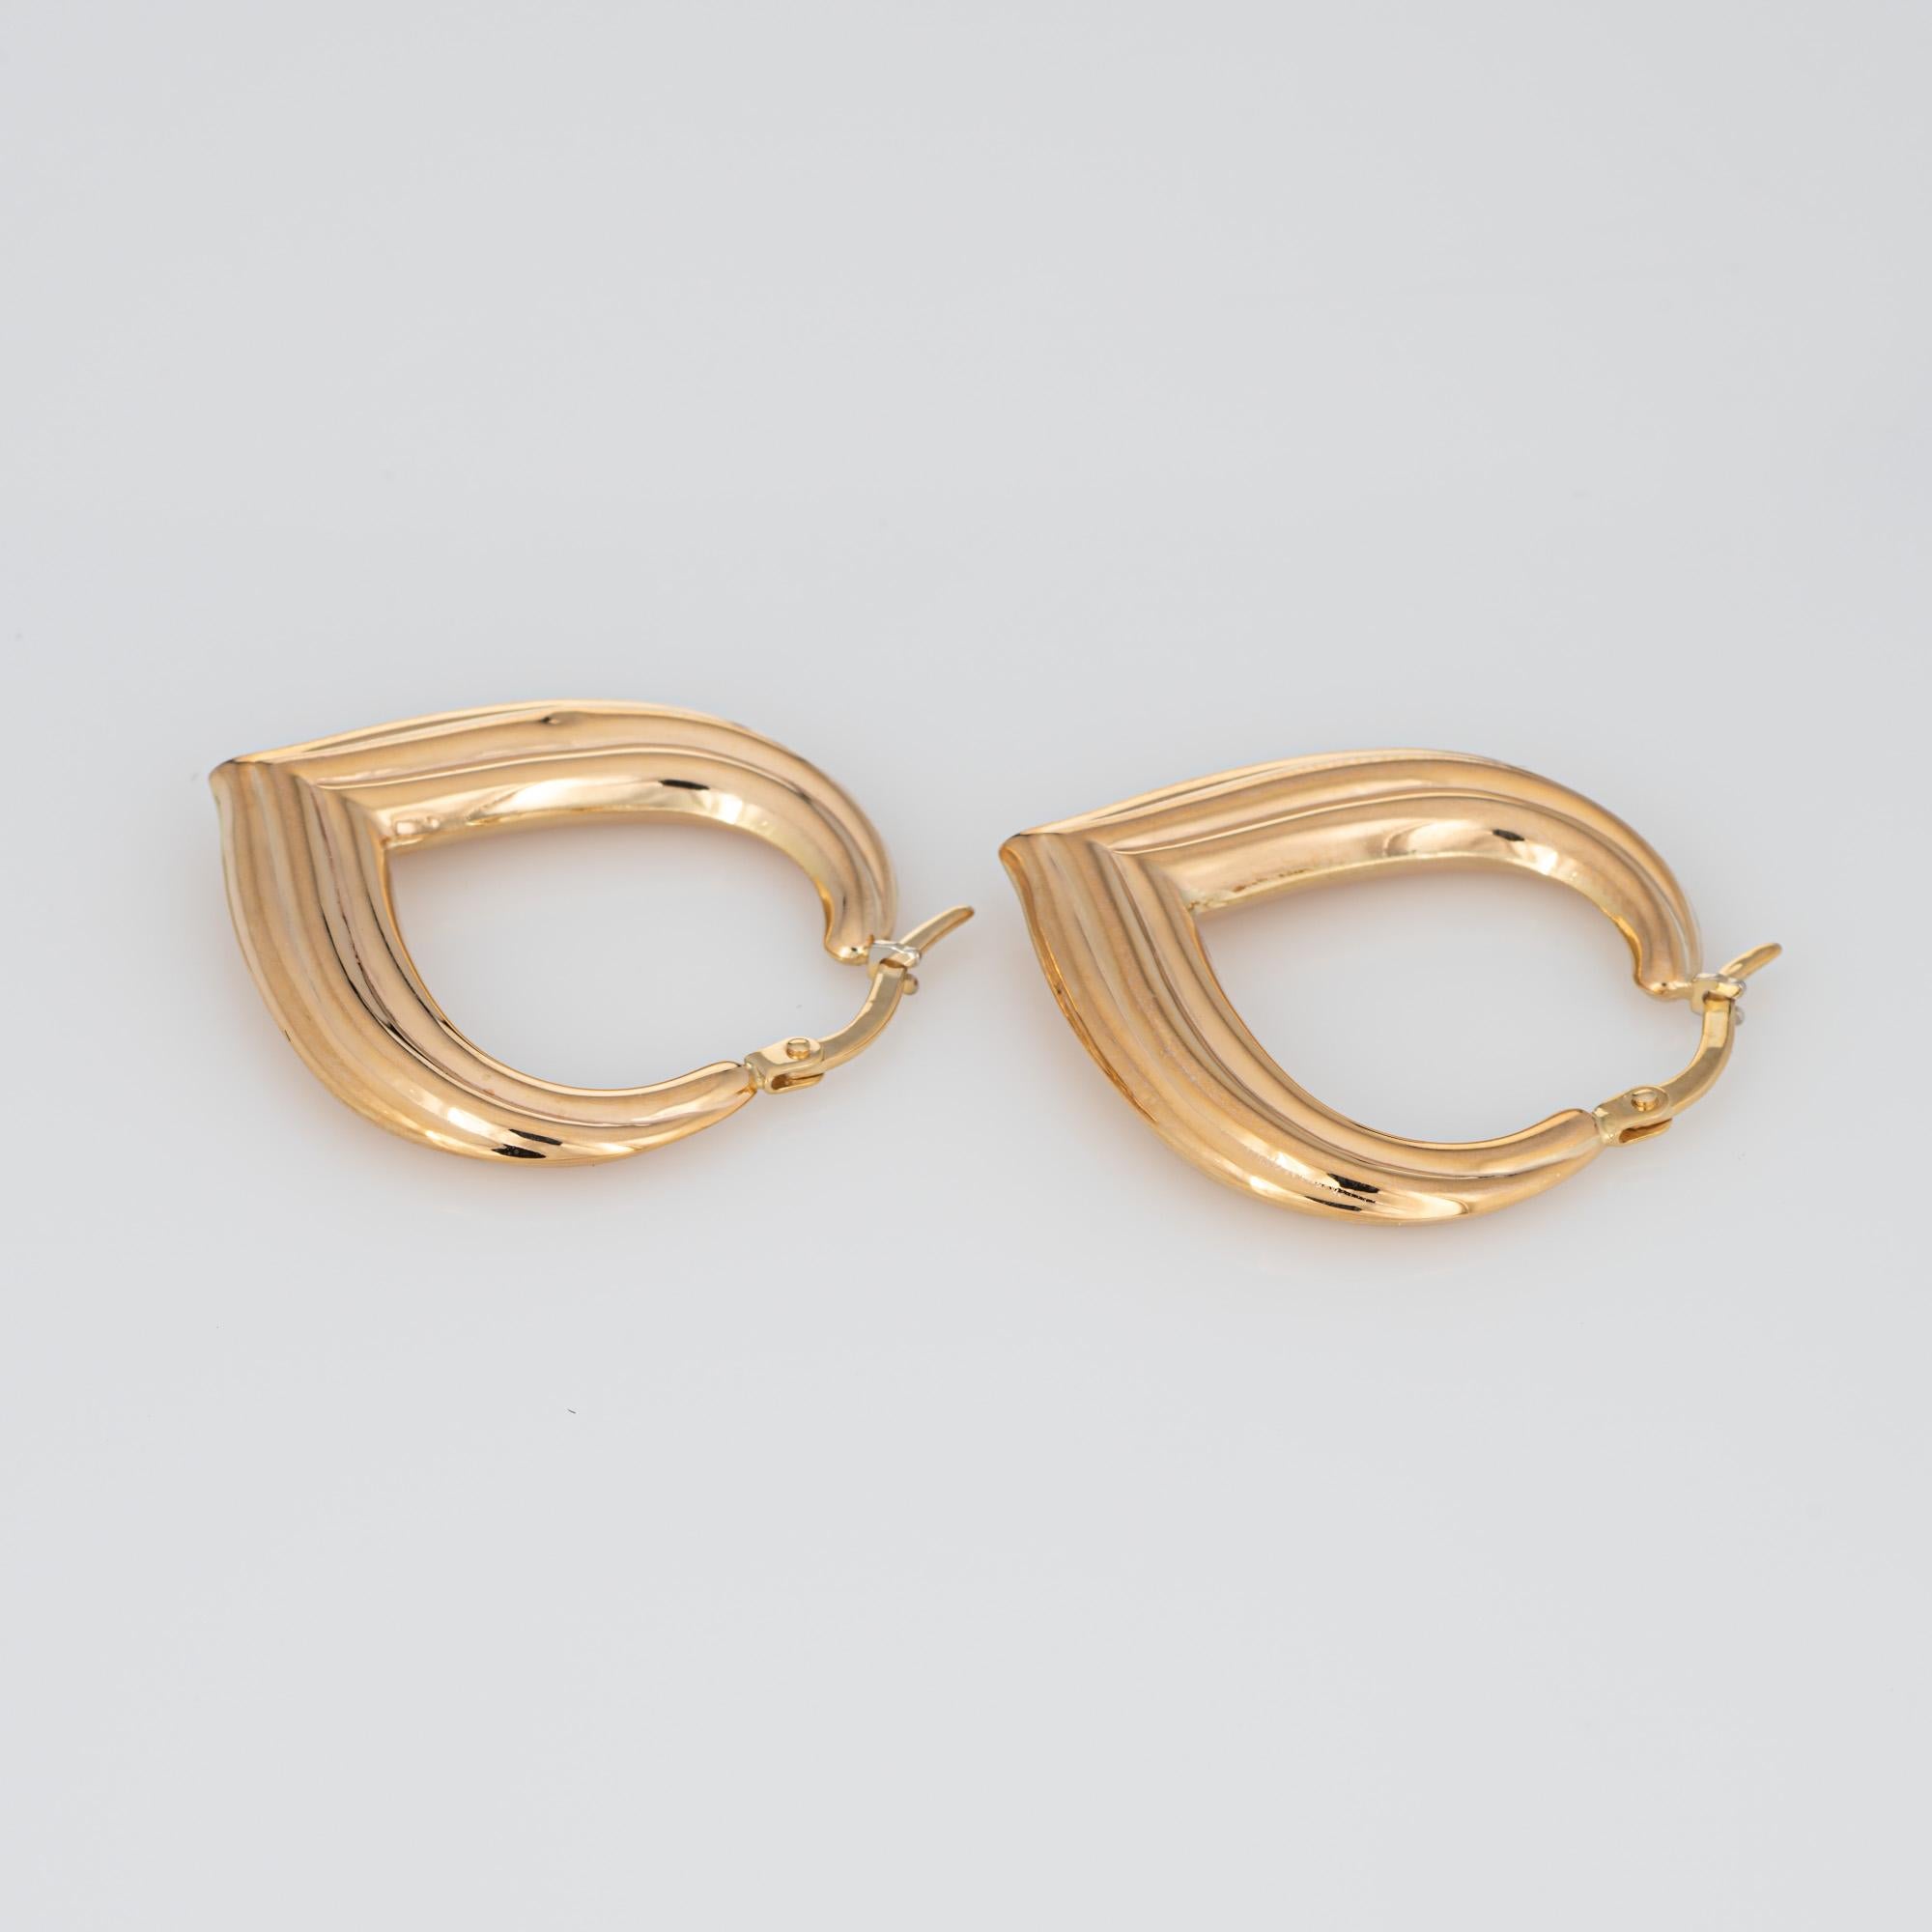 Fine detailed pair of pointed oval hoop earrings crafted in 14k yellow gold (circa 1980s). 

The stylish earrings feature a ridged design terminating to a pointed design. The hollow earrings offer a lightweight feel for a comfortable fit on the